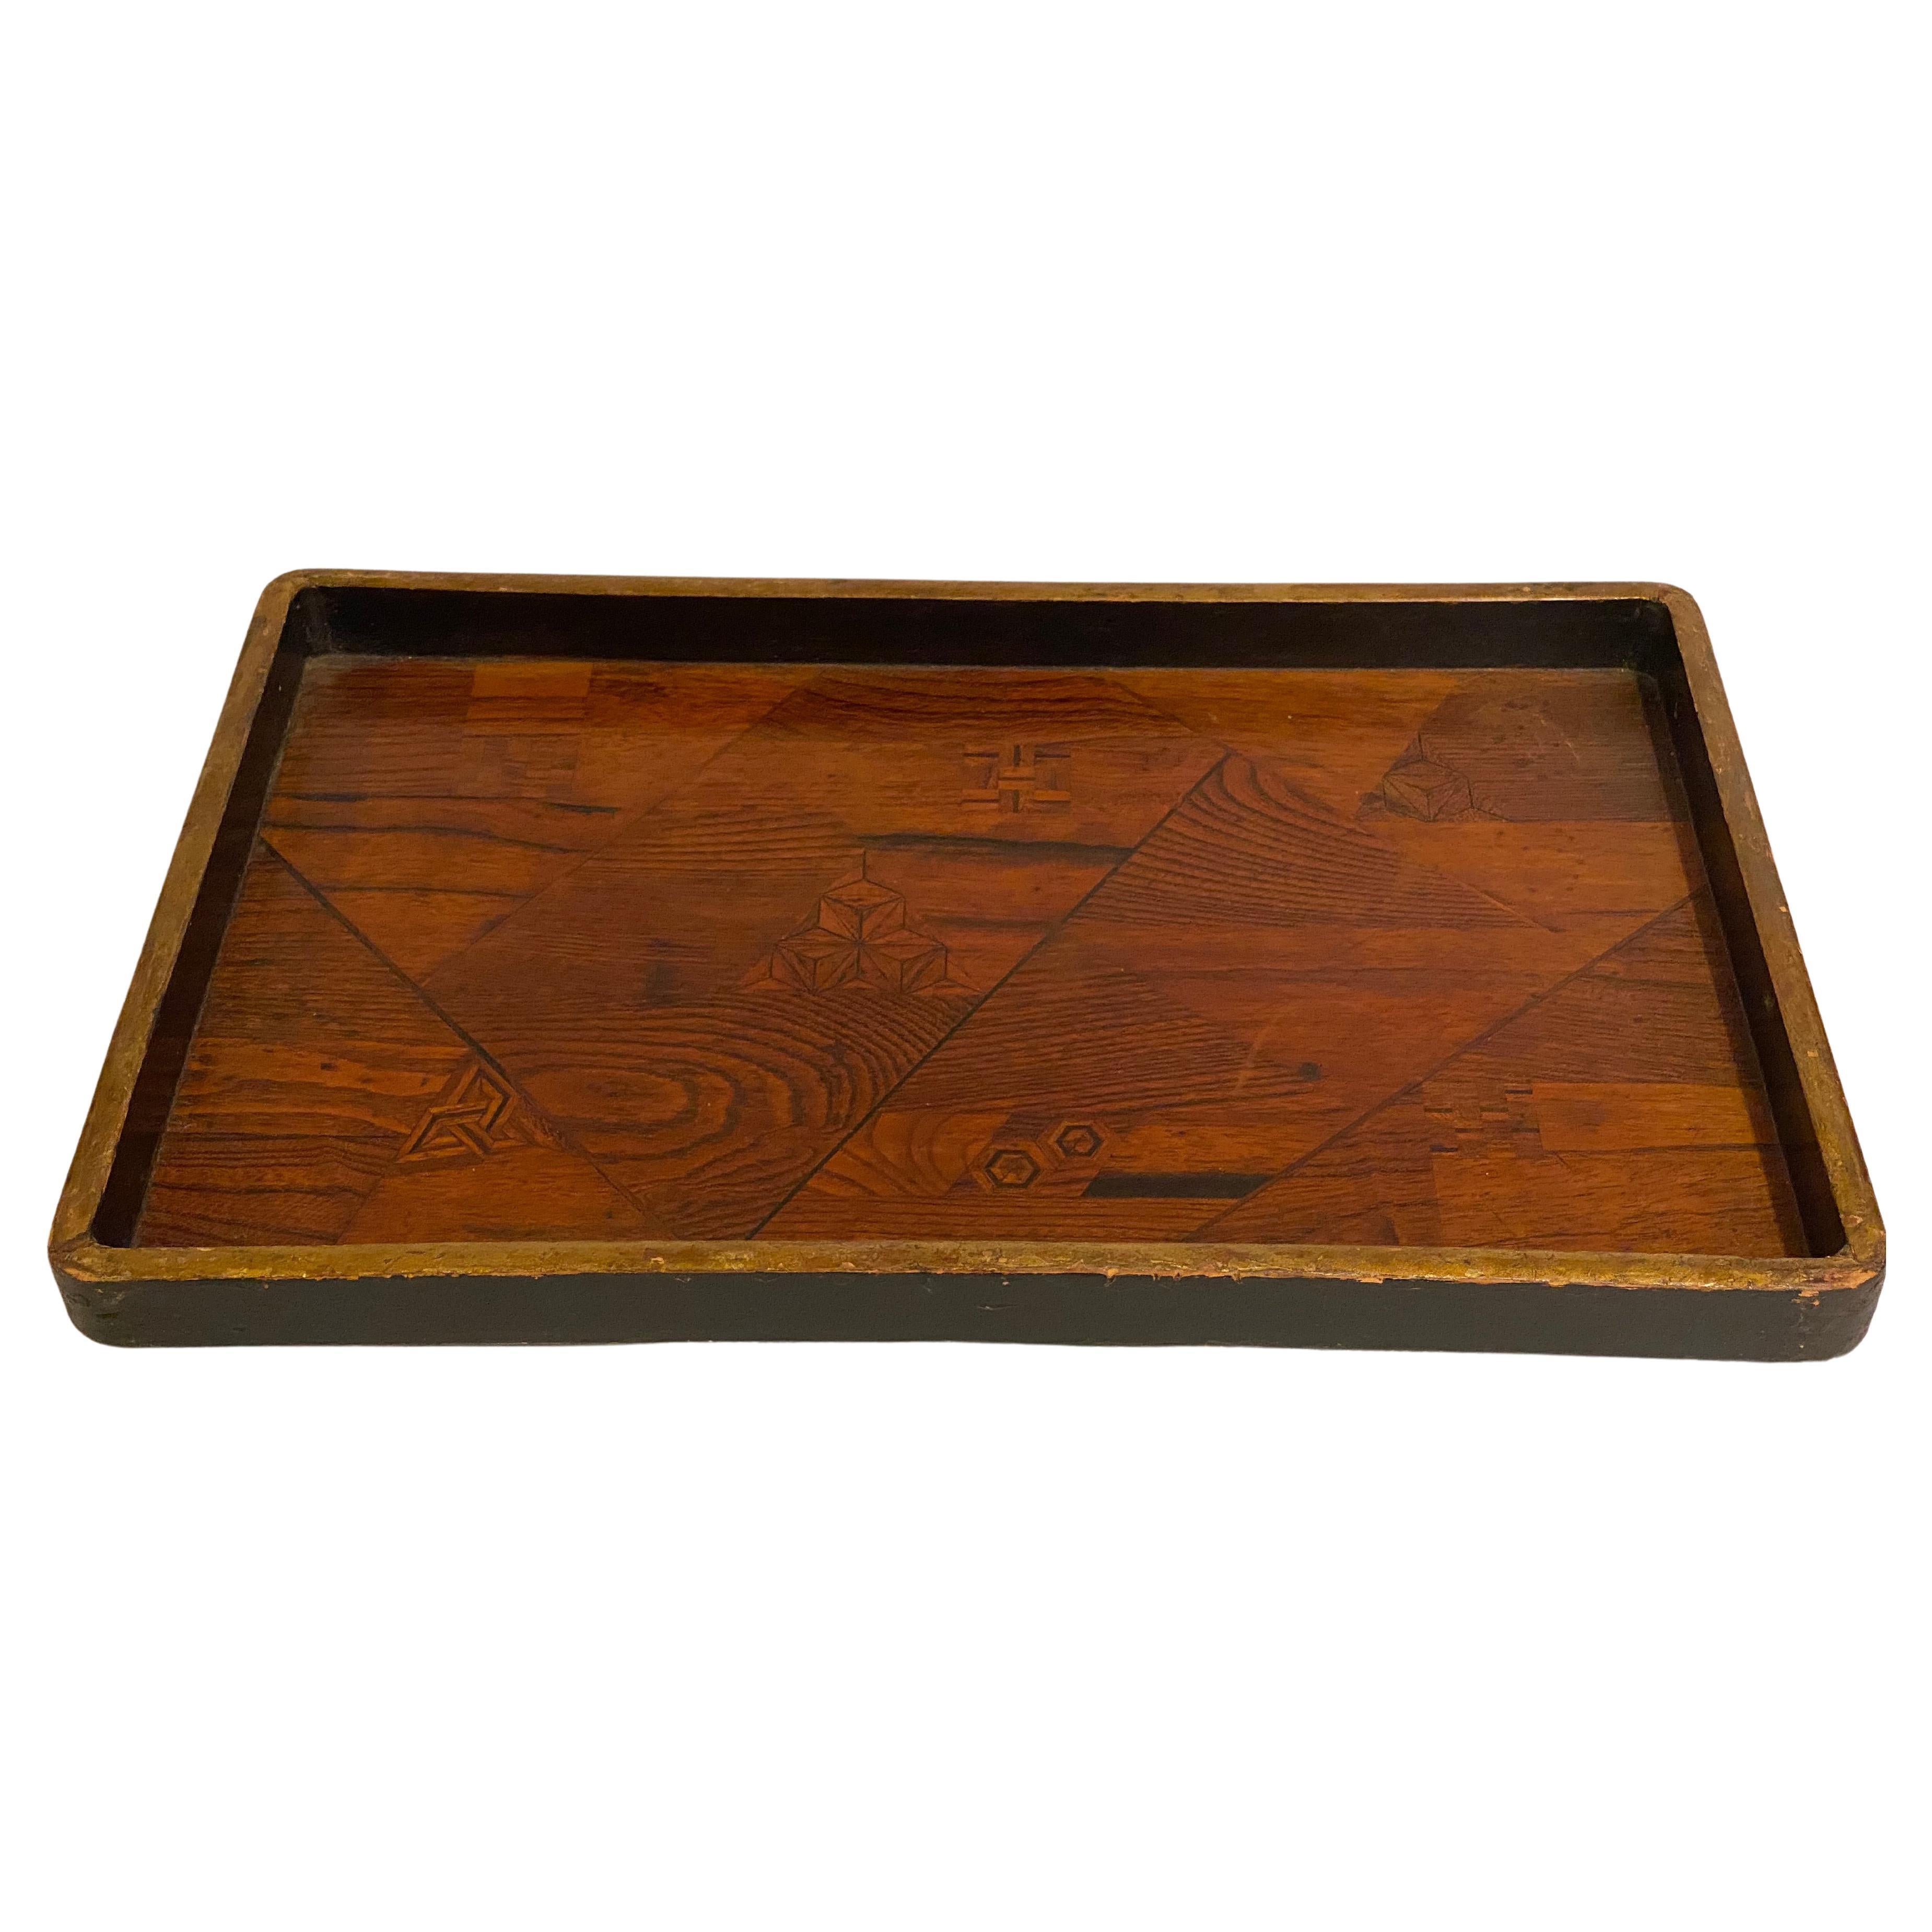 Japanese Lacquer and Geometric Meiji Period Inlaid Tray